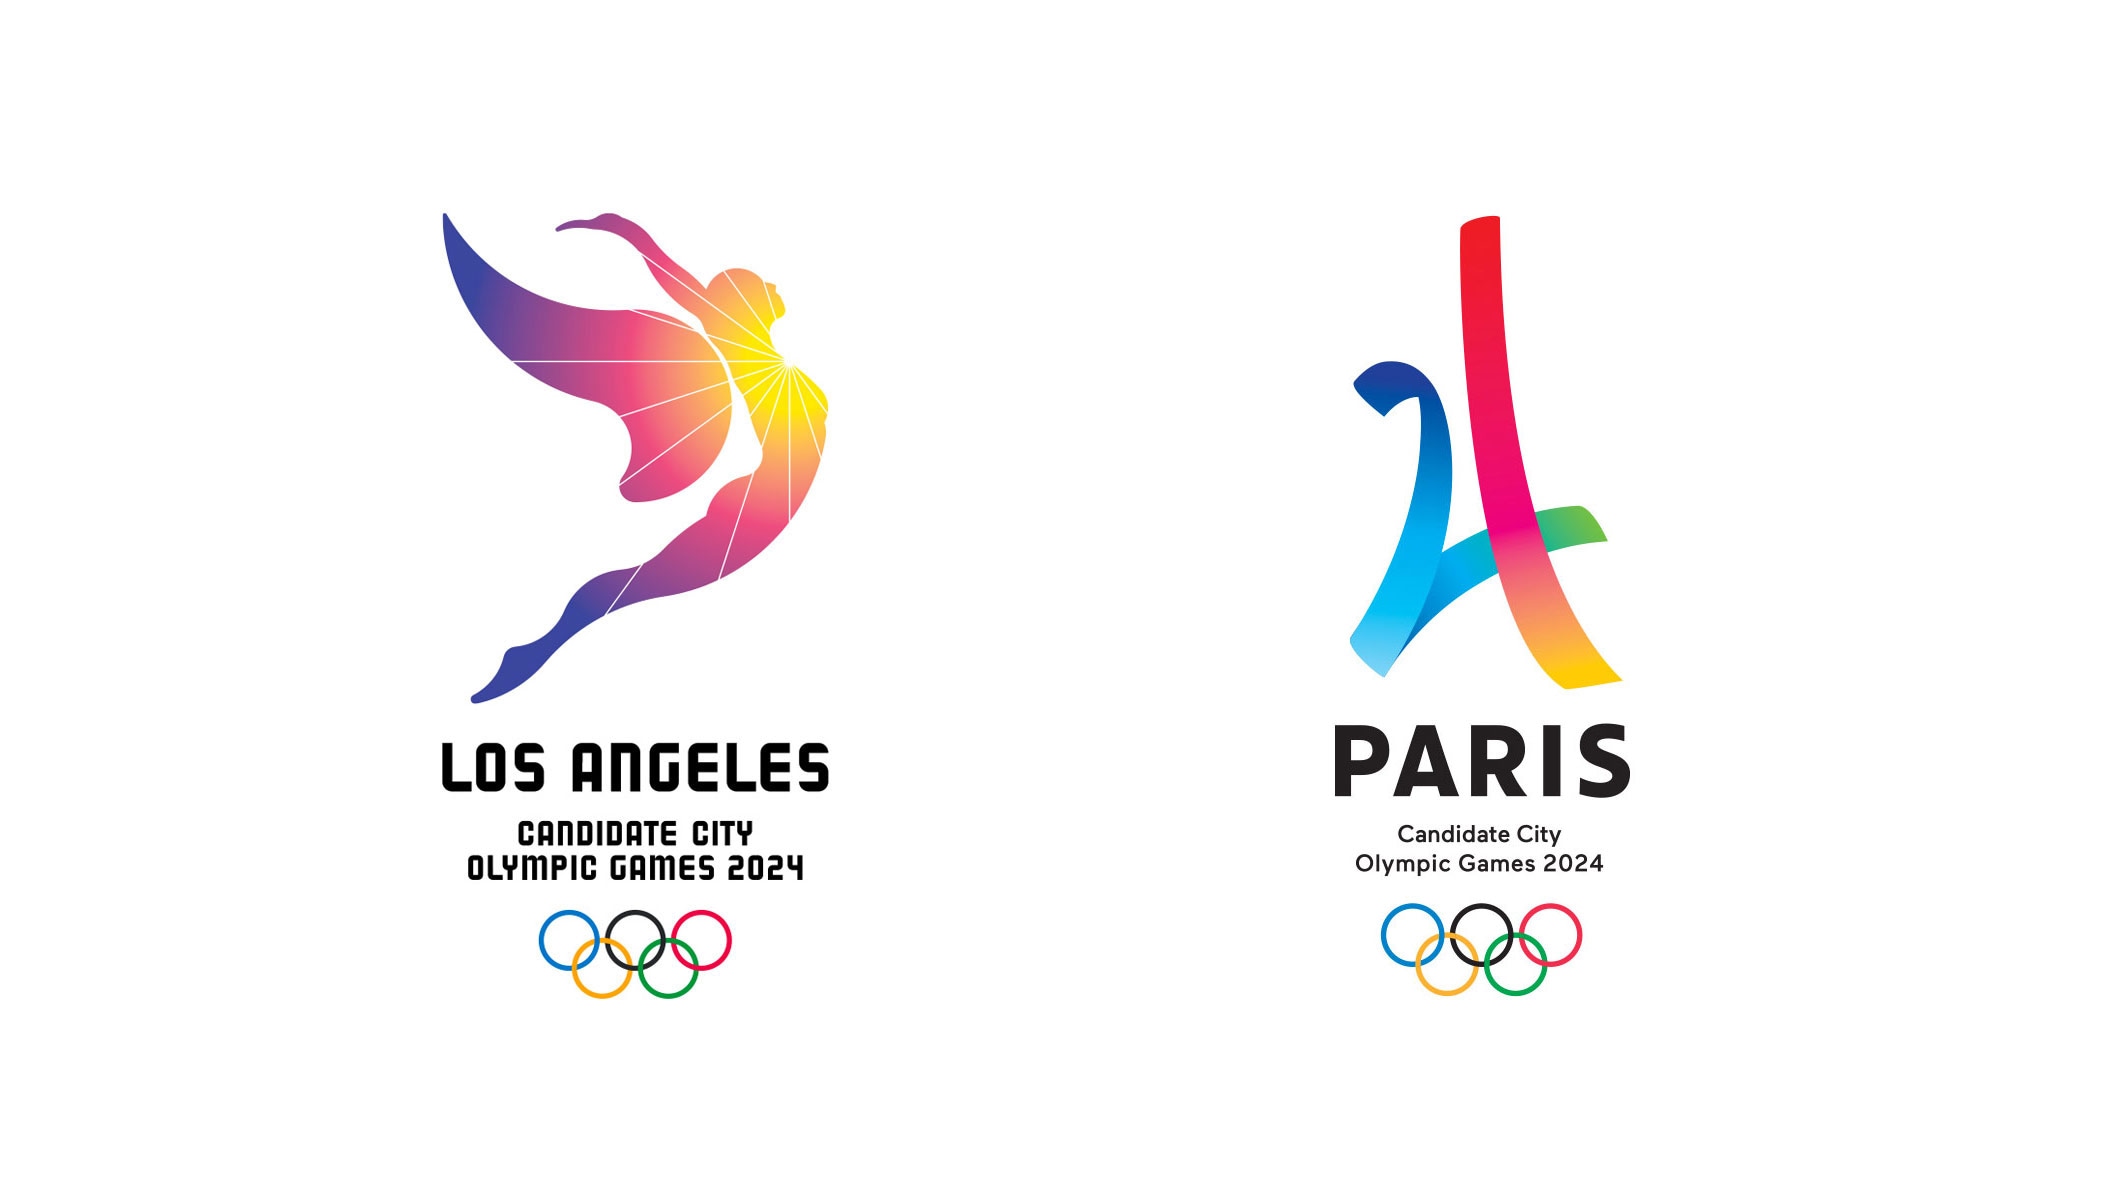 Awarding the Olympic Games 2024 and 2028 is a golden opportunity ...